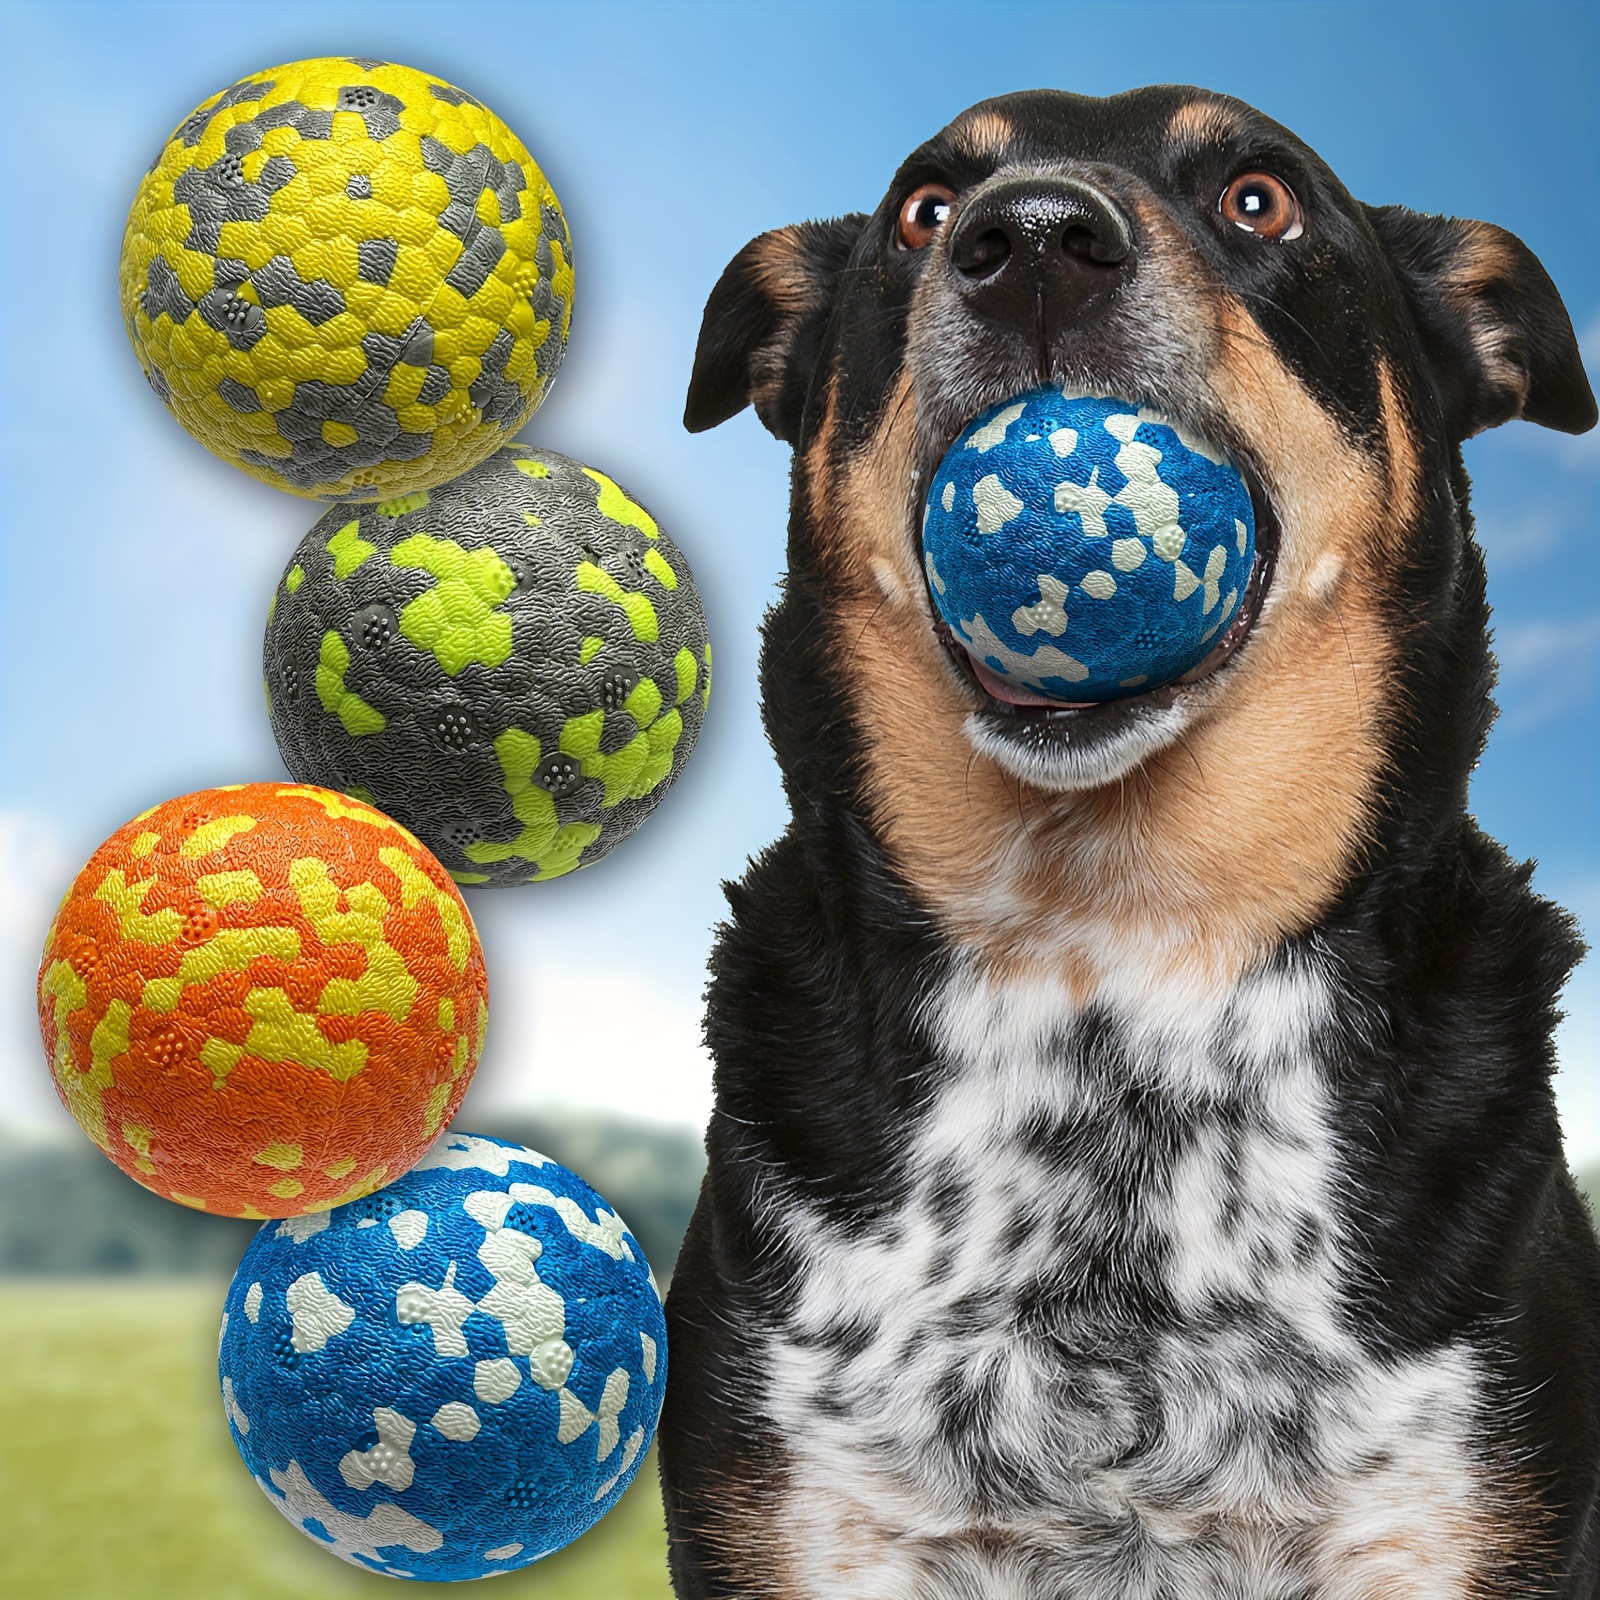 Chew Play Fetch Pet Toys Fetch Bite Toy Resistant Dog Training Ball